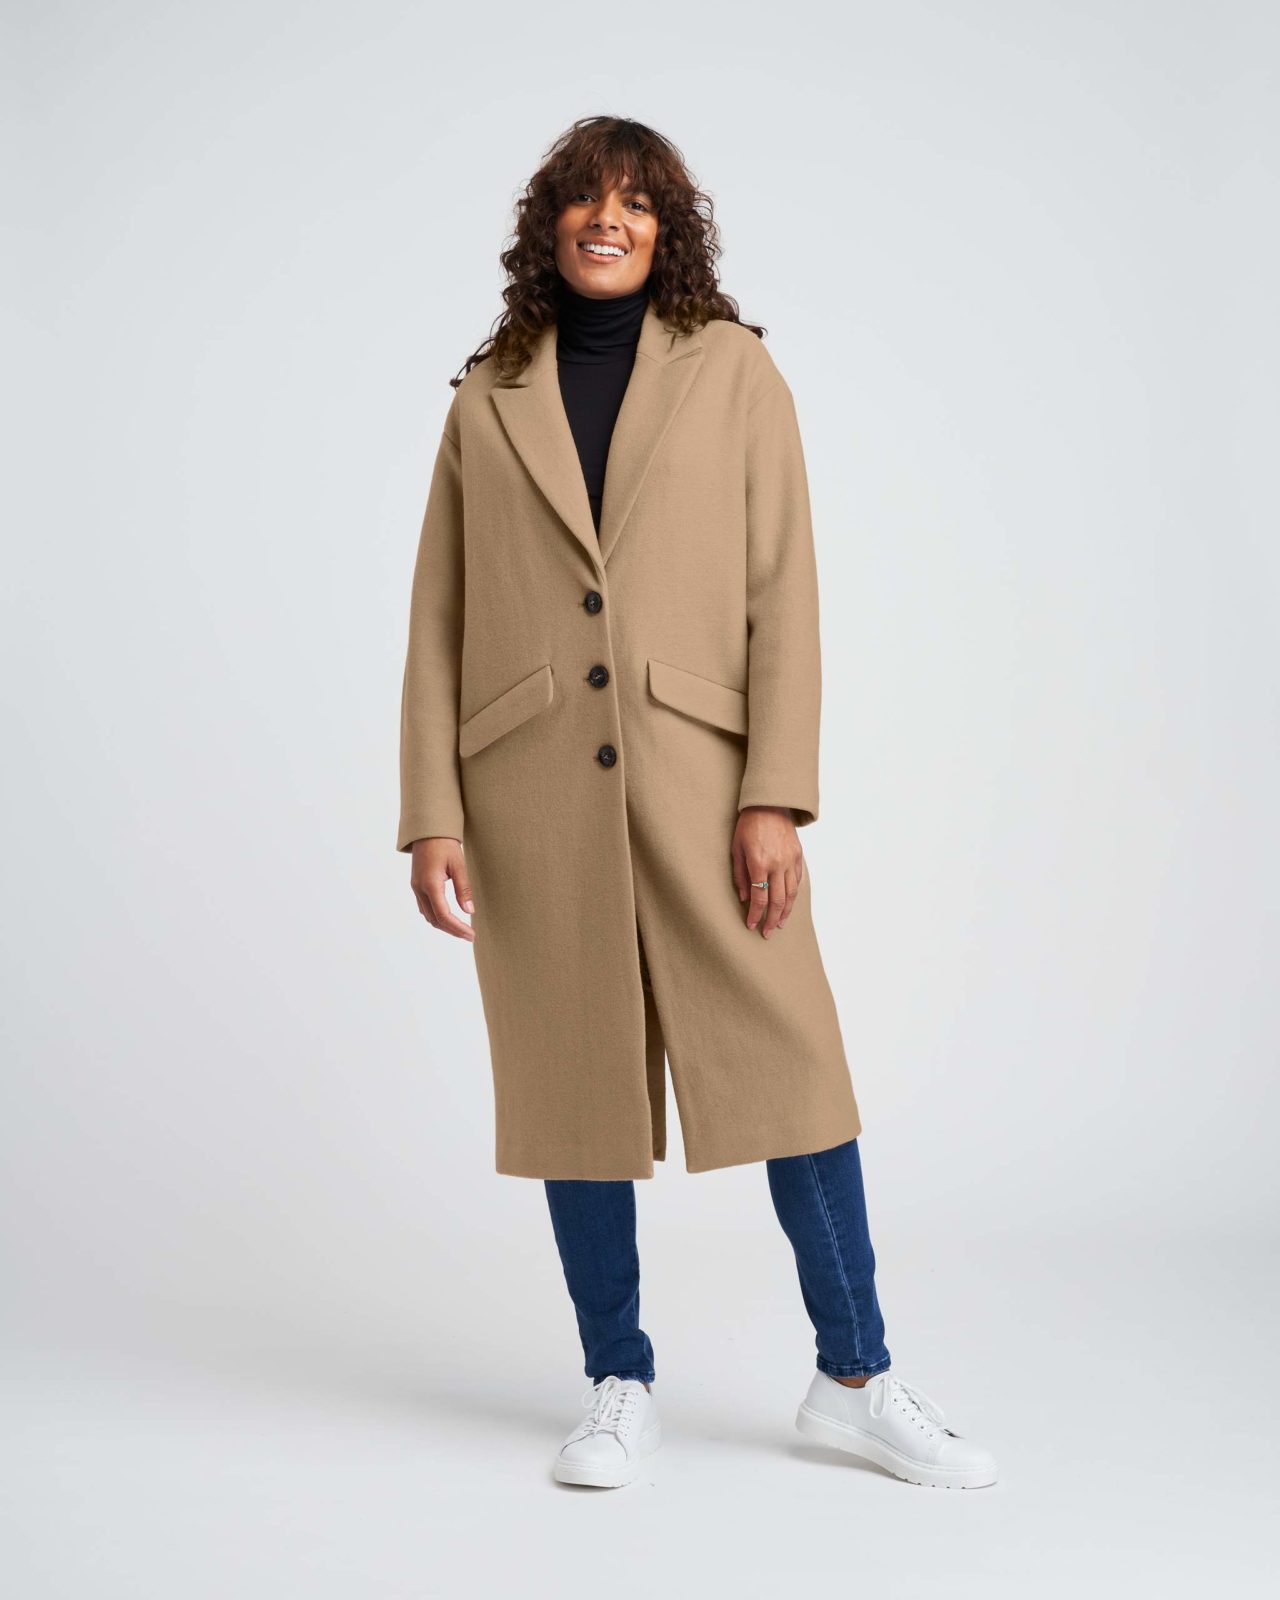 5 Coat Styles I'm Most Excited to Wear This Winter | Wit & Delight